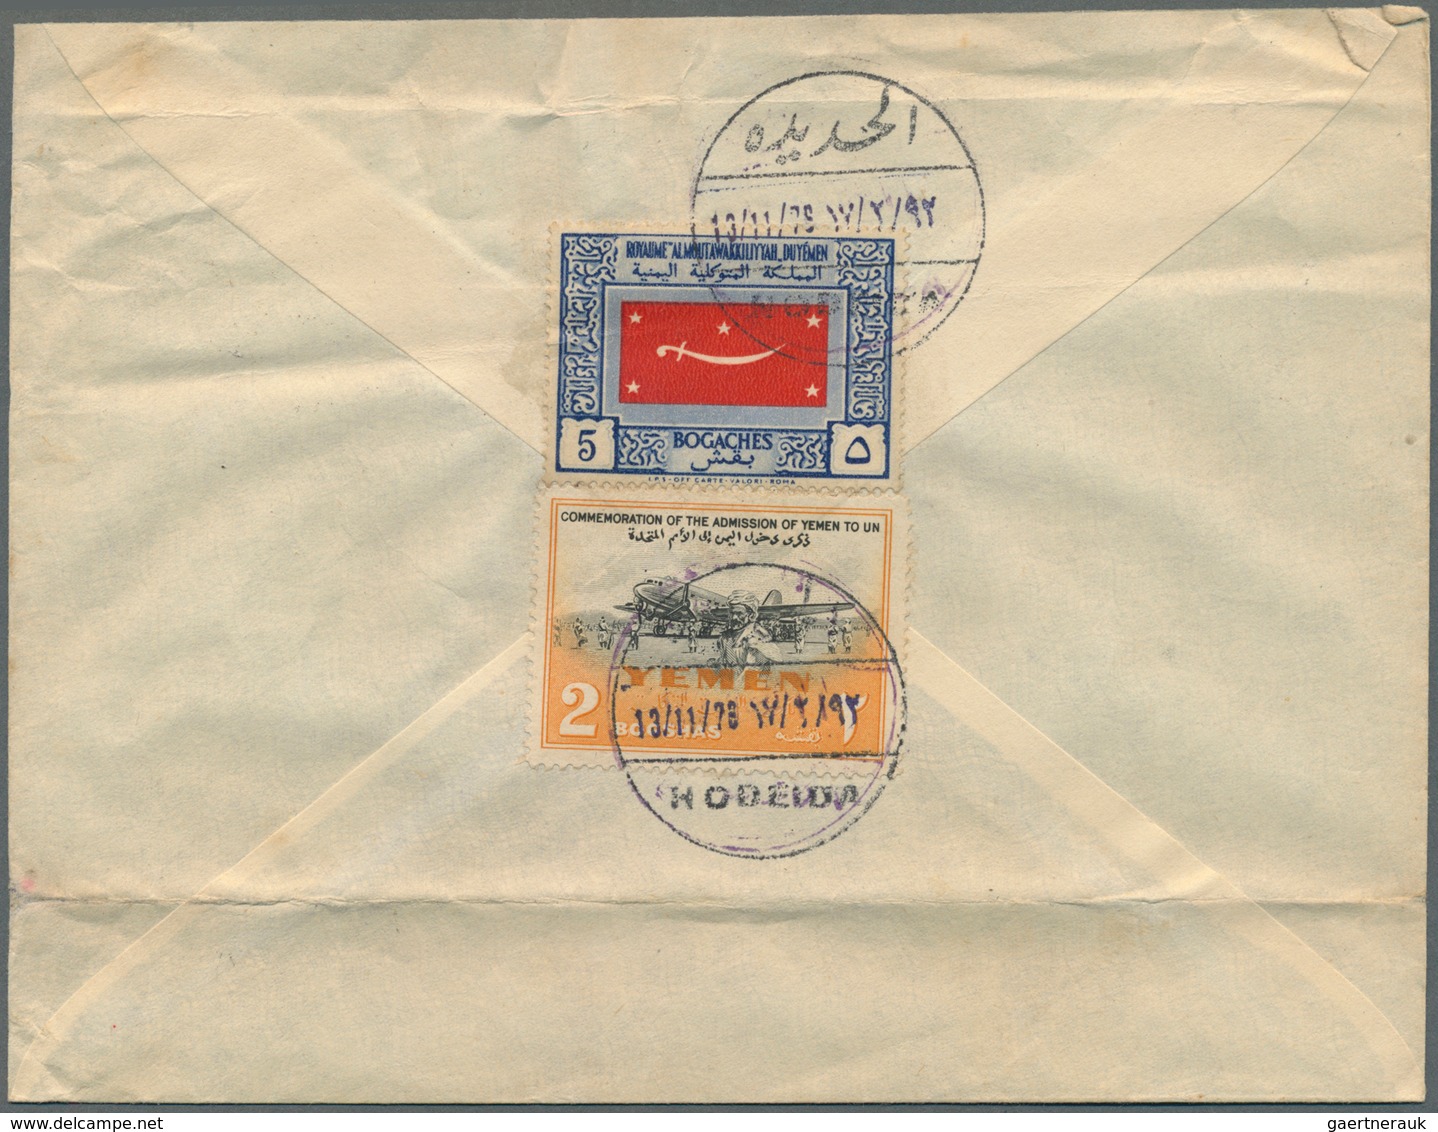 Jemen: 1950/1965 (ca.), assortment of 55 covers, apparently mainly commercial mail (postal wear/impe